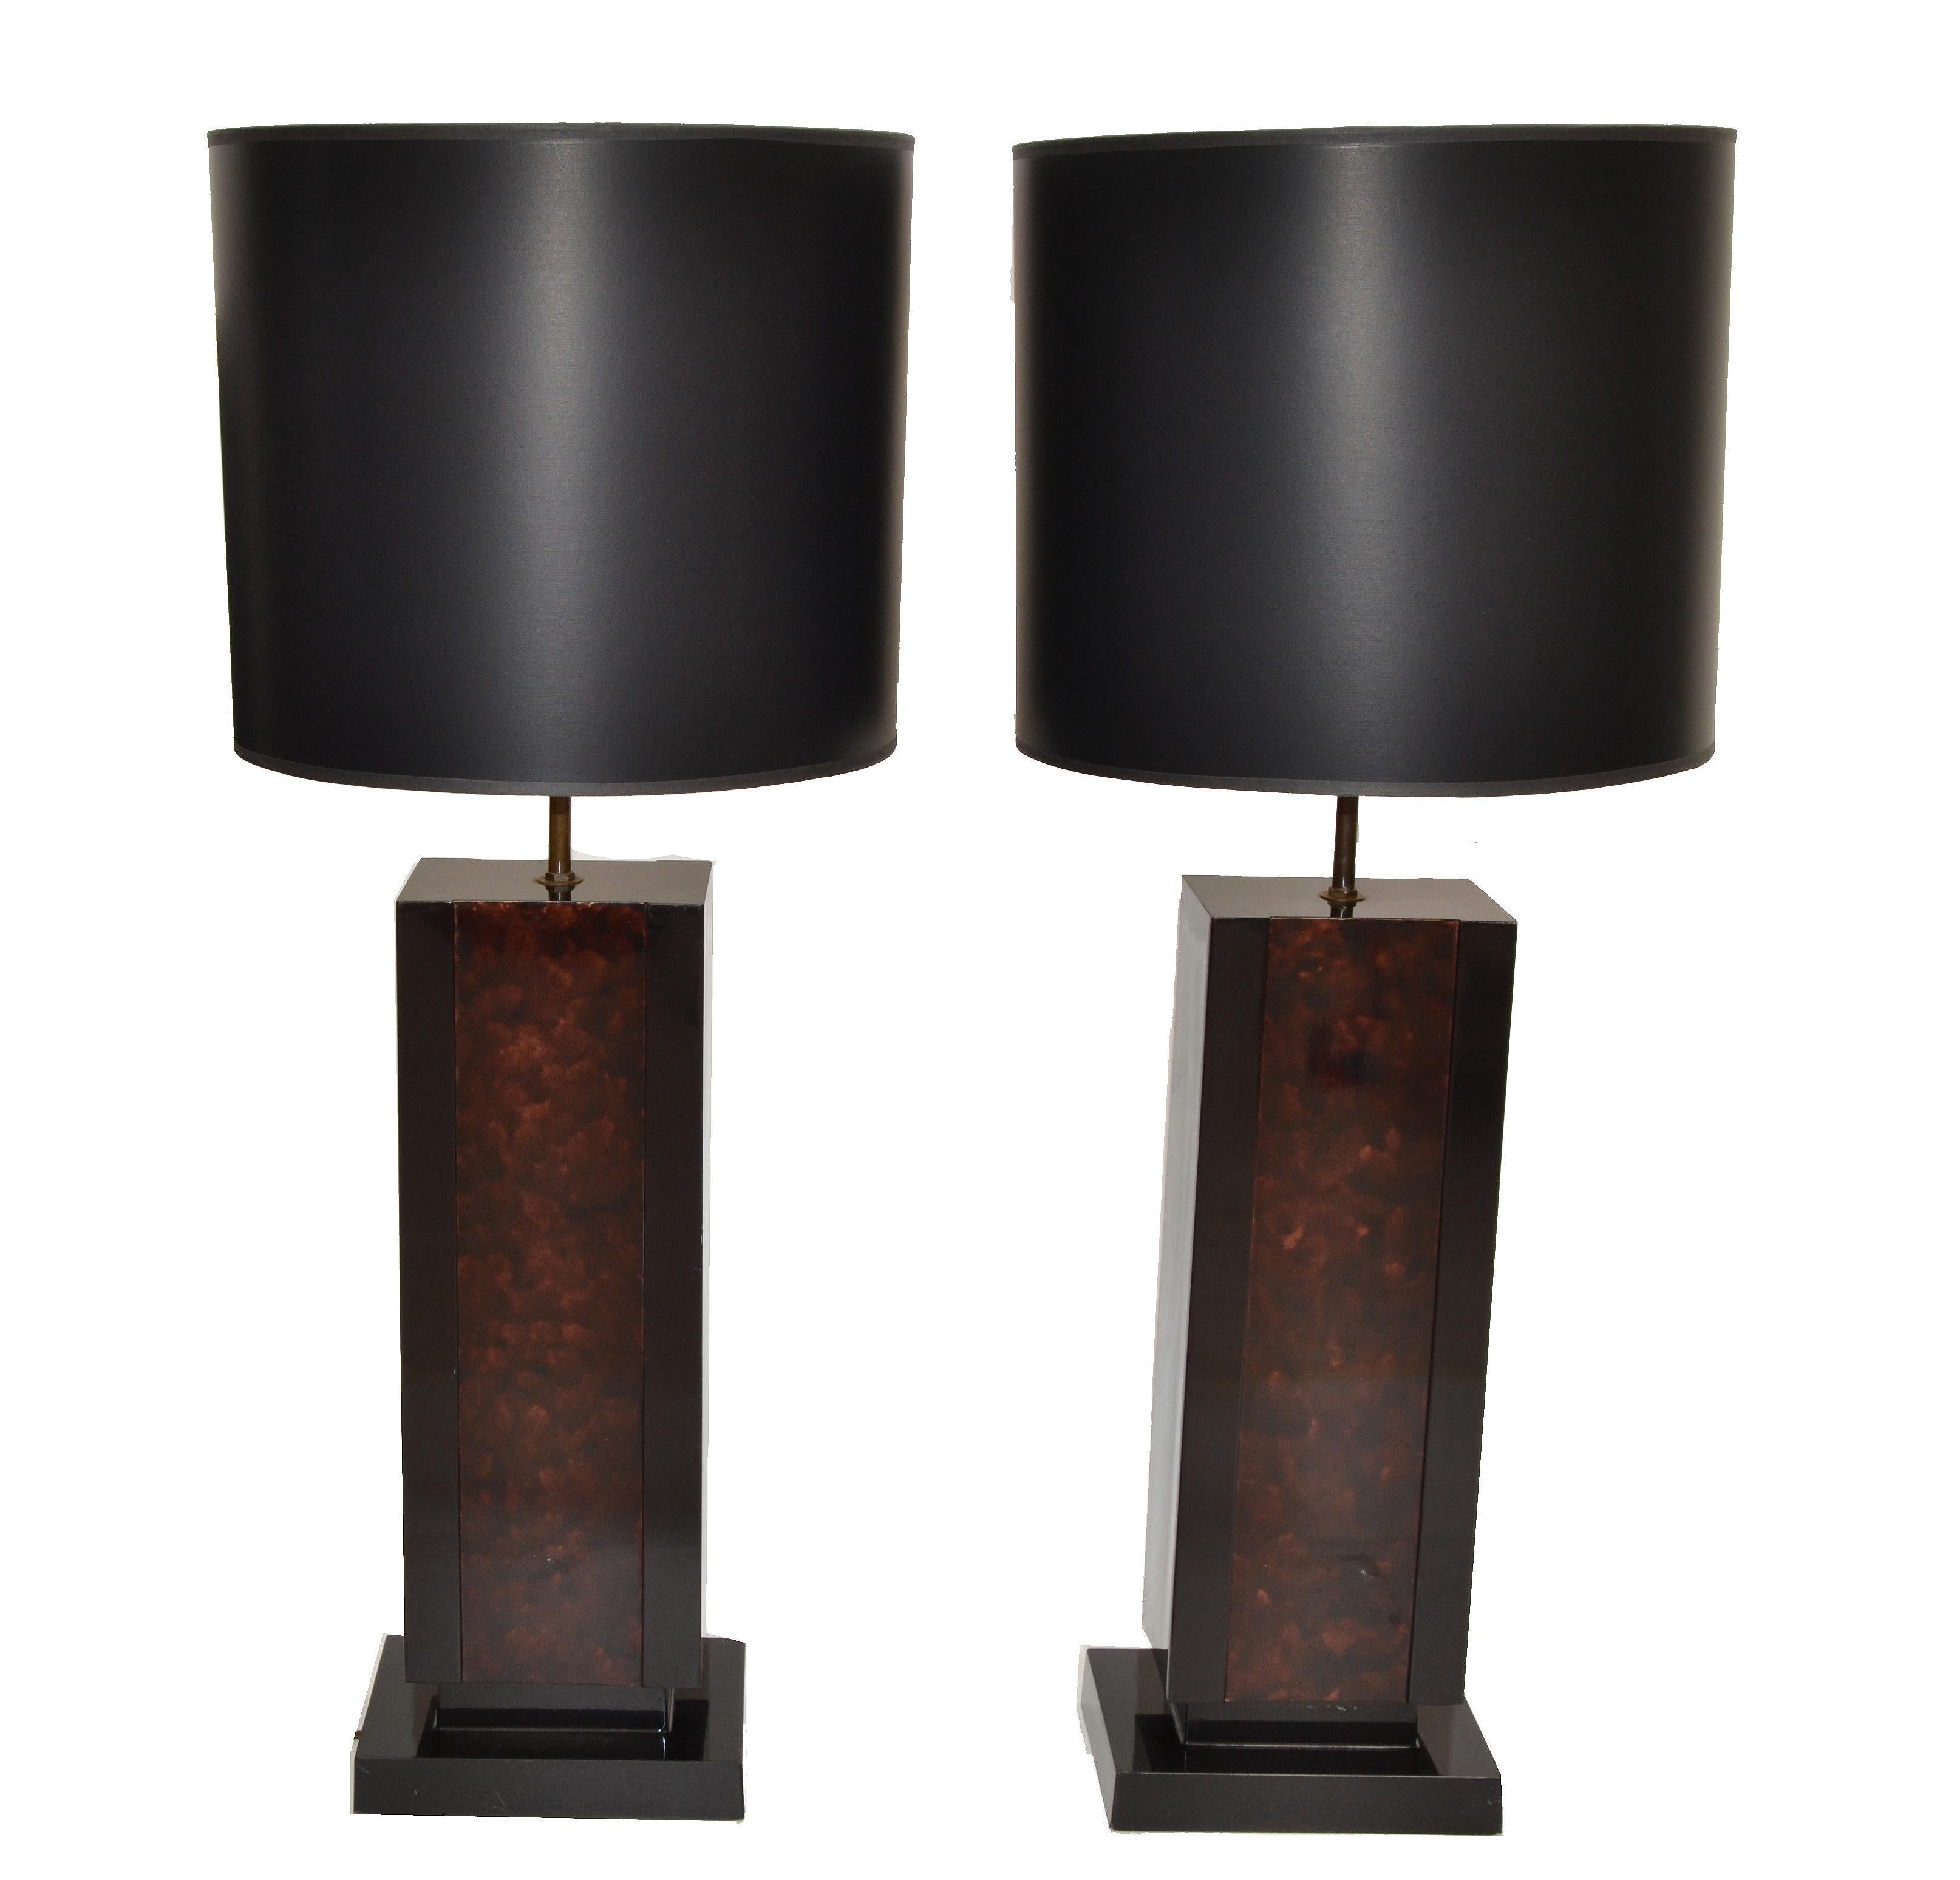 Pair of large and heavy Maison Lancel table lamp in patinated brass and black lacquered wood base.
Decorative Glass in bronze & taupe color in the center.
Harp can be adjusted, it pulls out about 4 inches.
They are in there all original